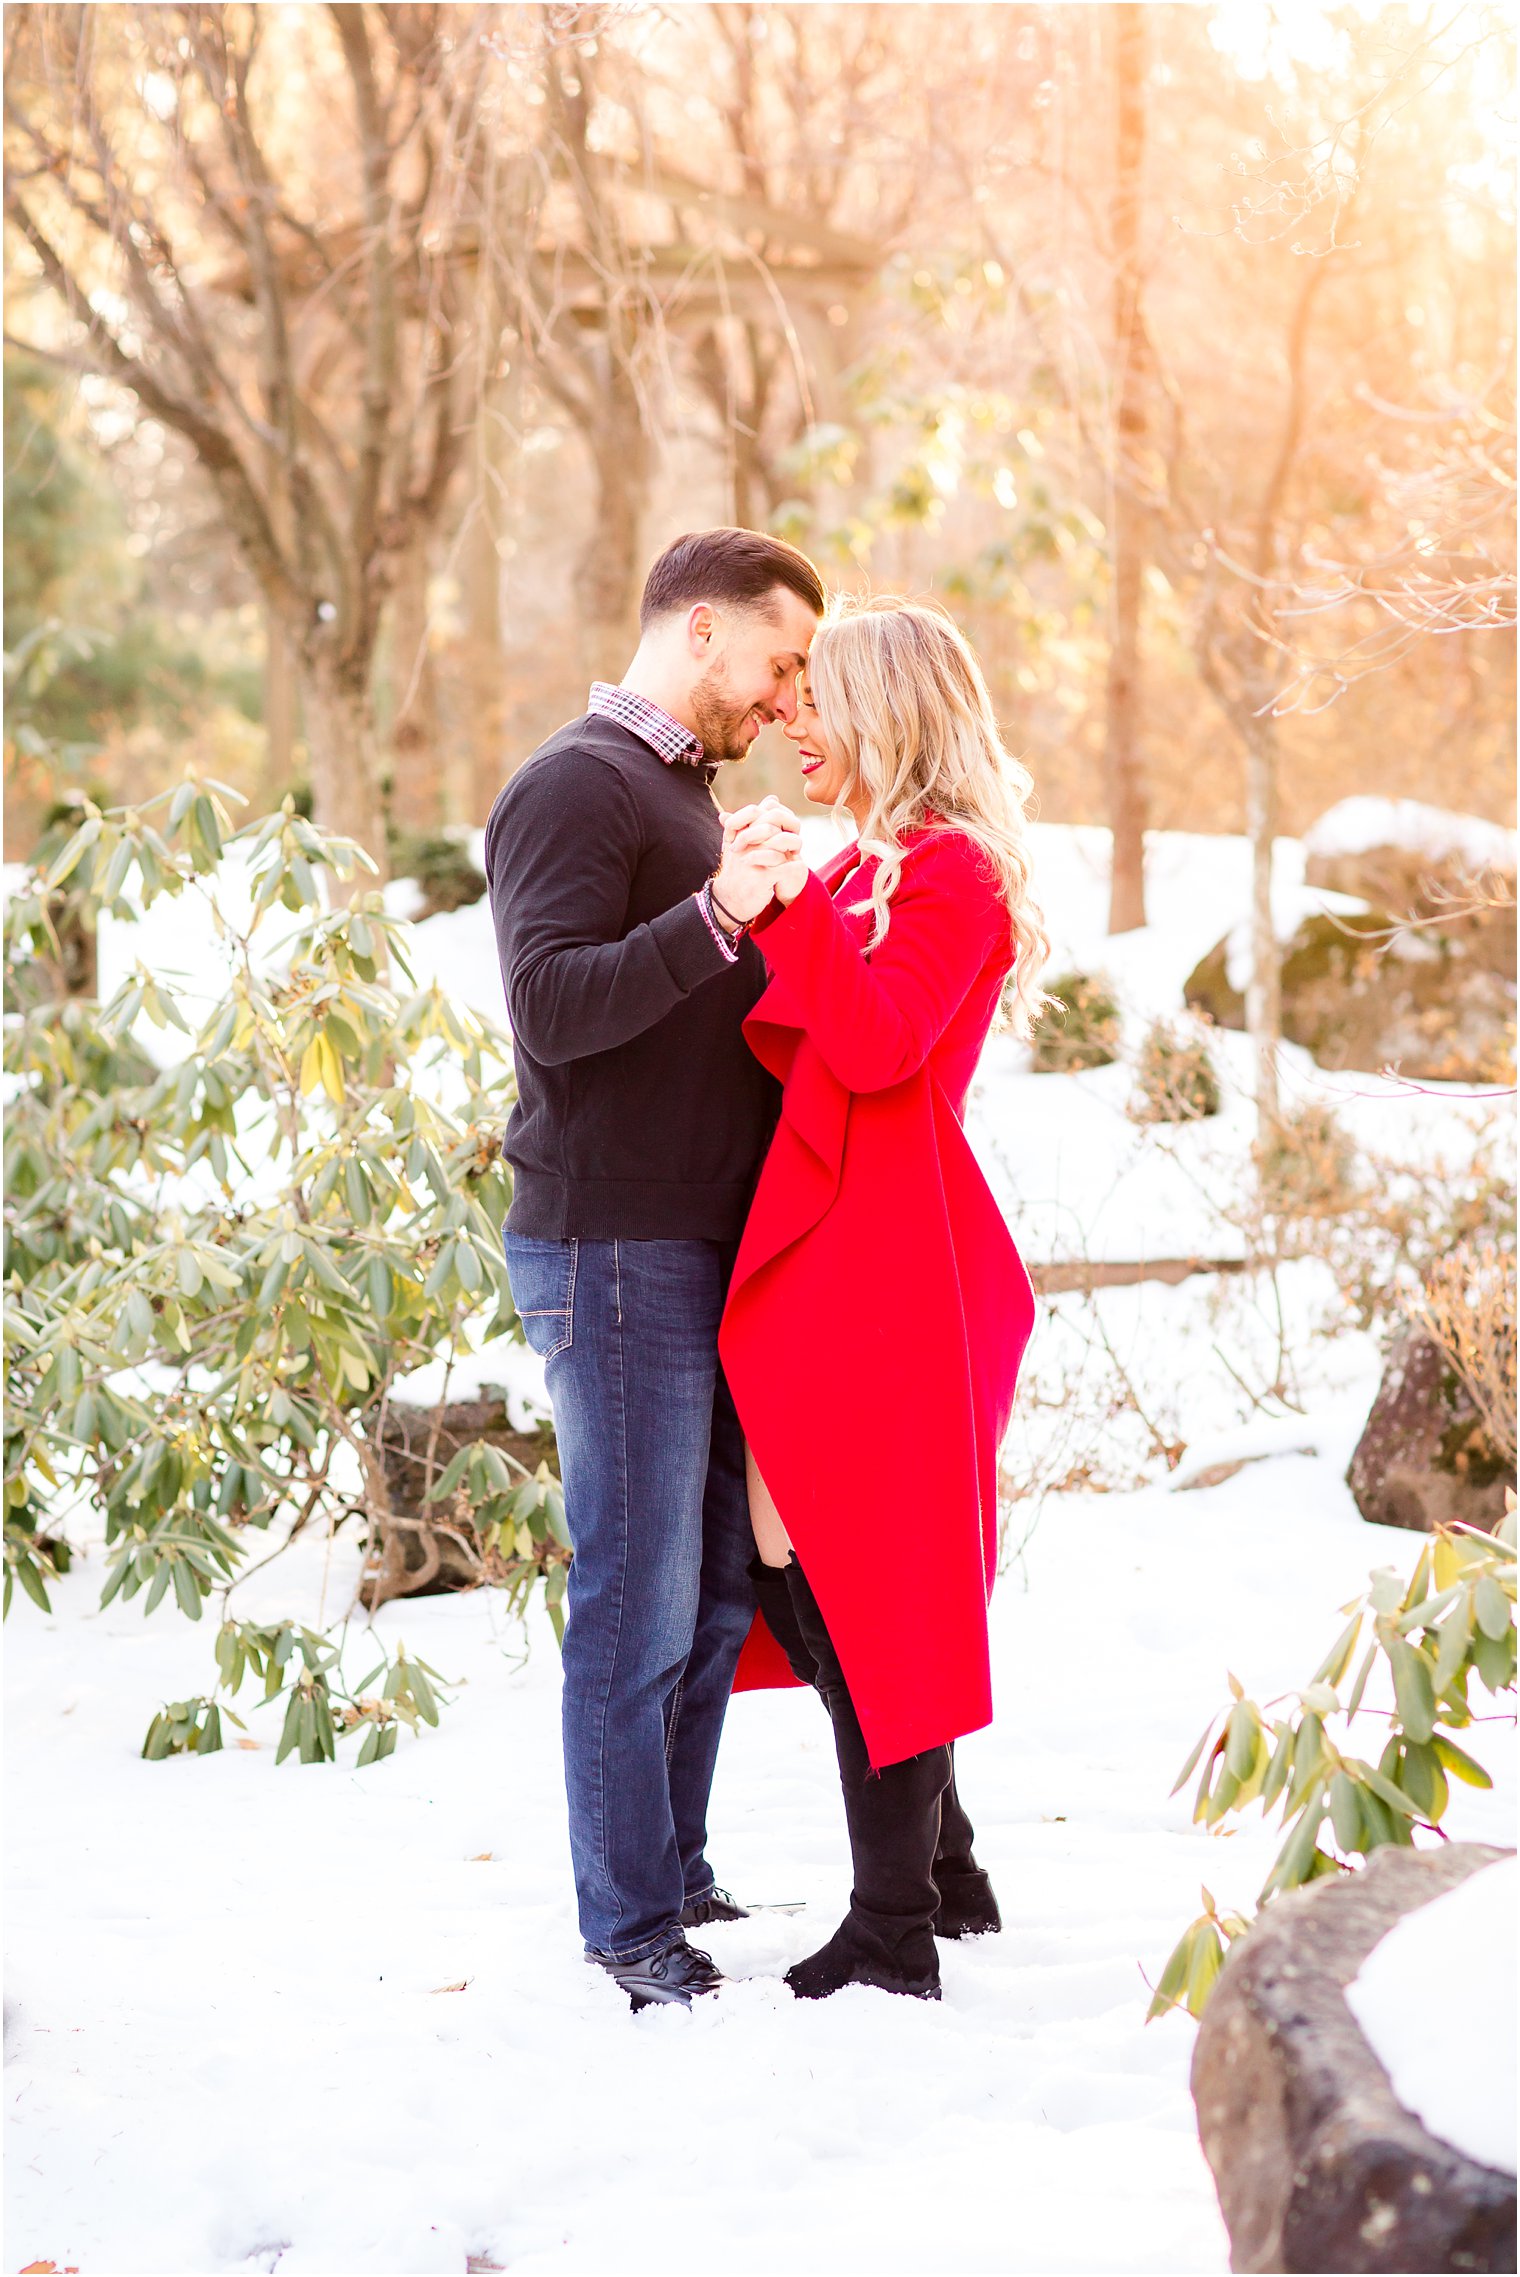 Romantic portrait of bride and groom in the snow